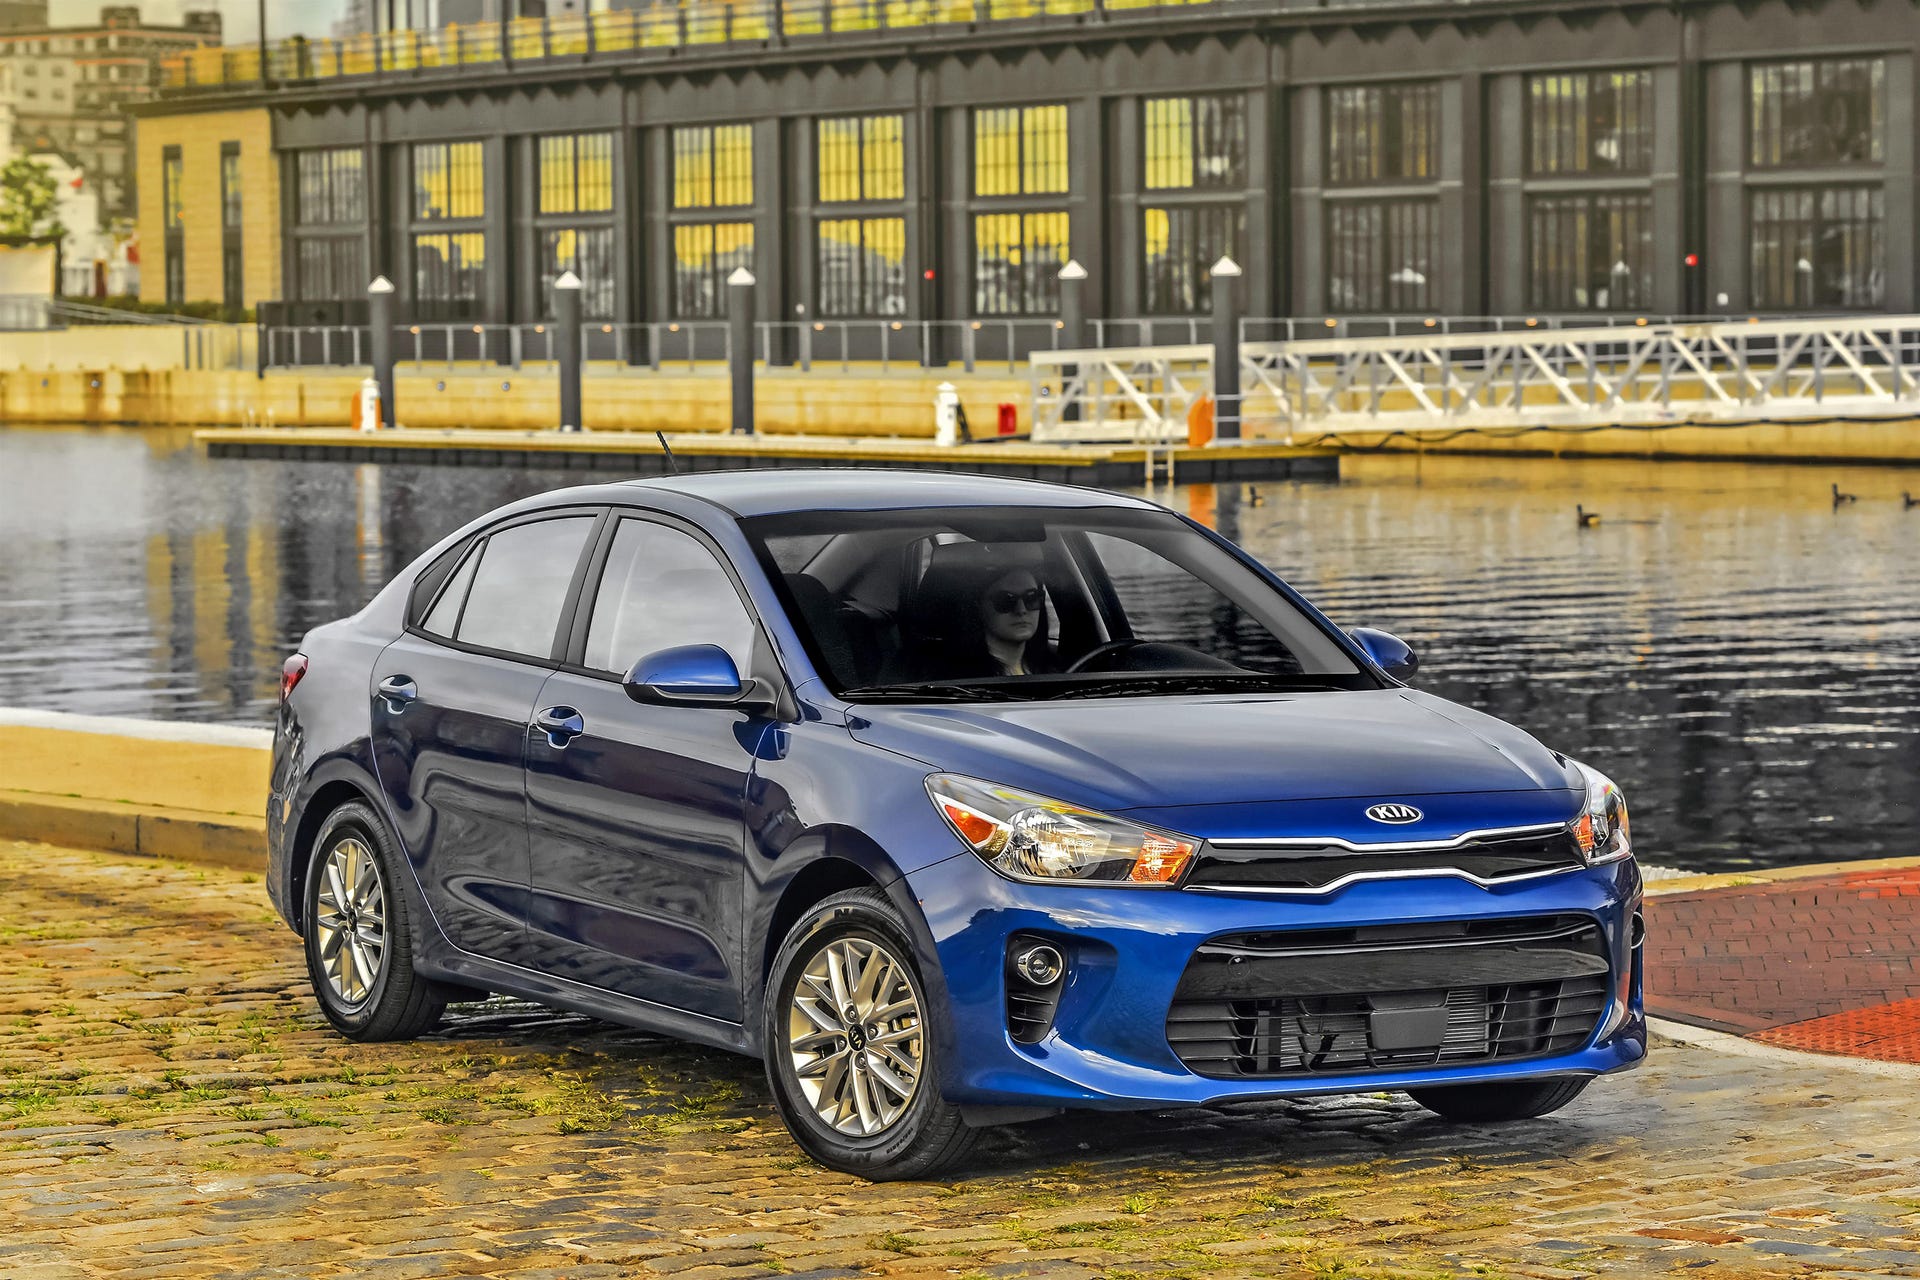 2018 Kia Rio First Drive Review: price, release date, photos, specs, more -  CNET